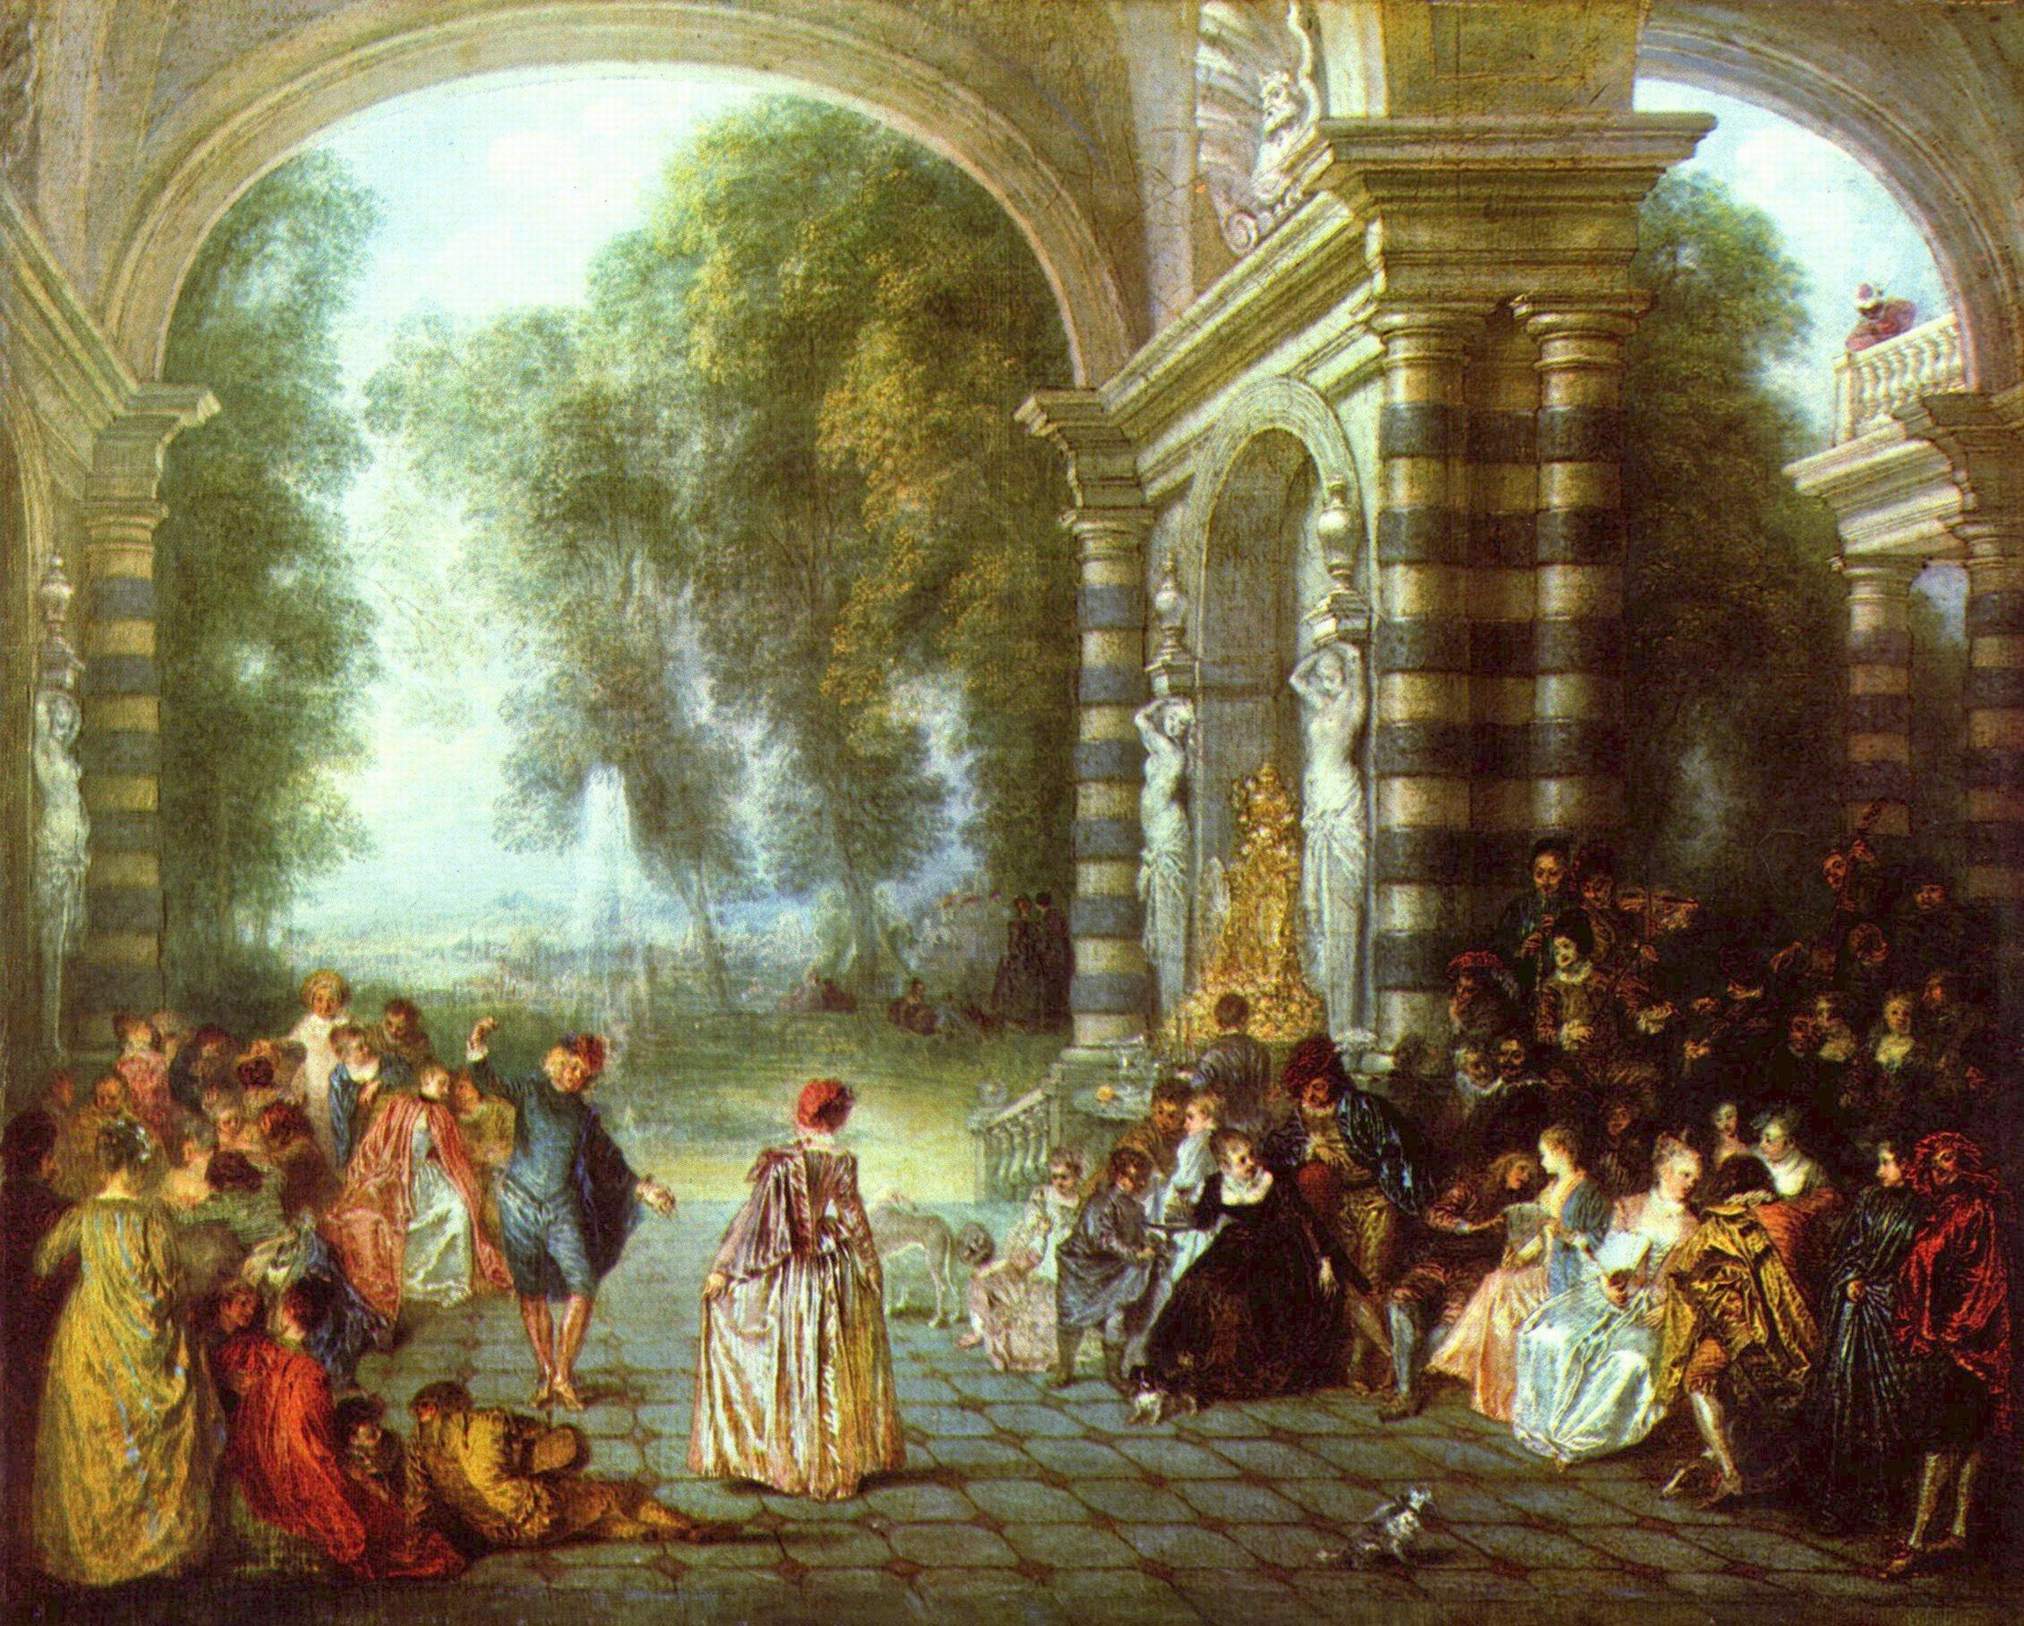 18th-century painting of people dancing by great, ornate columns.